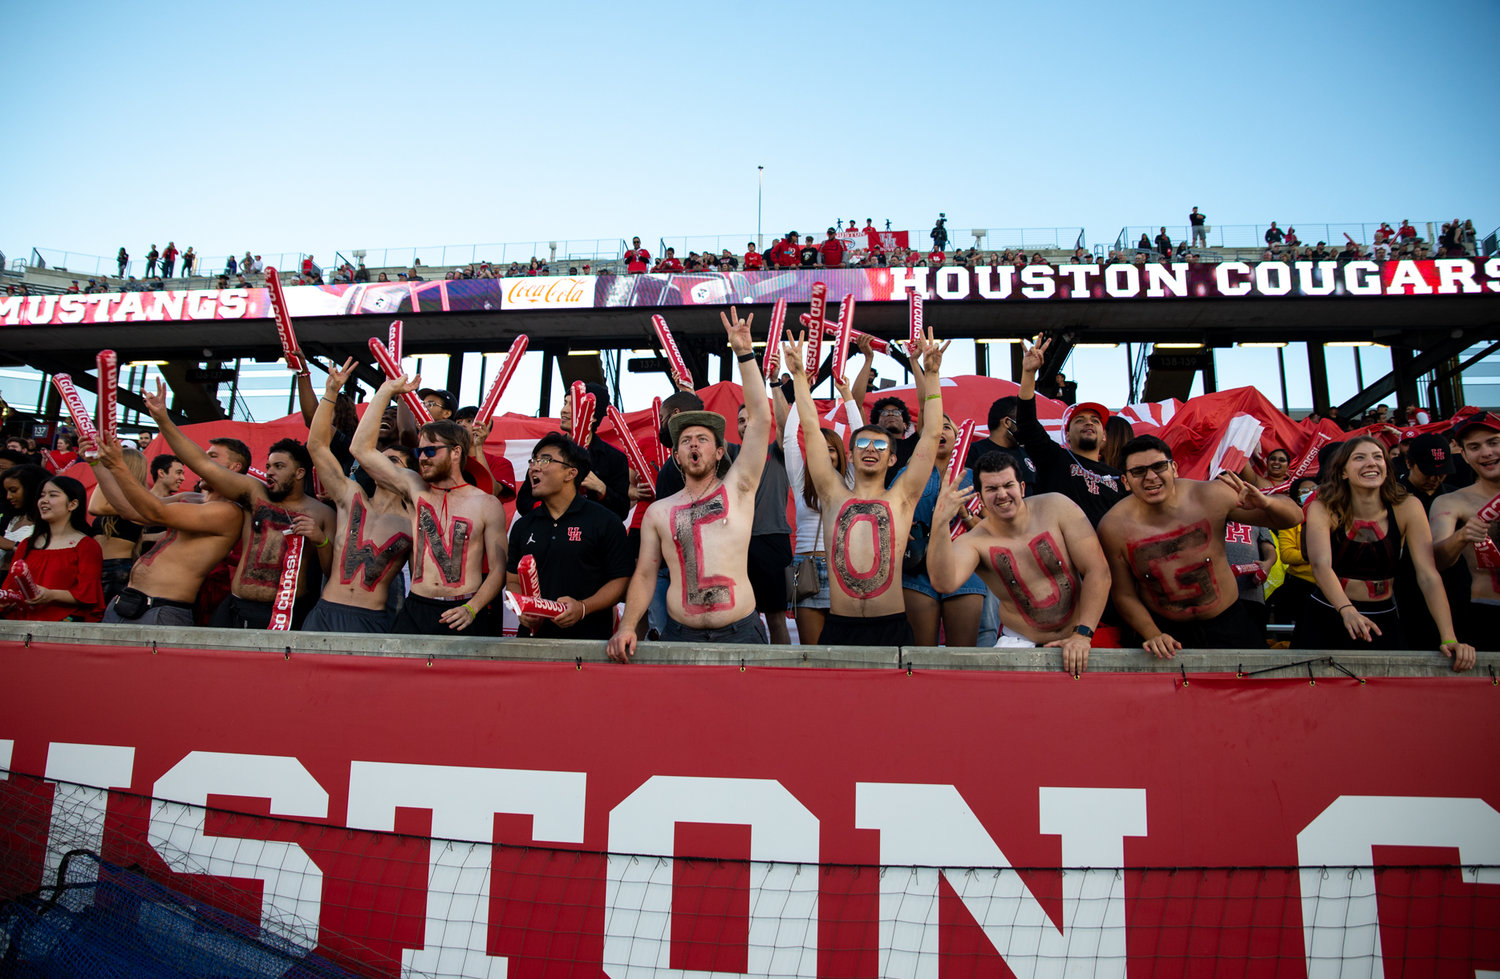 Houston Cougars students cheer during an NCAA football game between Houston and SMU on October 30, 2021 in Houston, Texas.